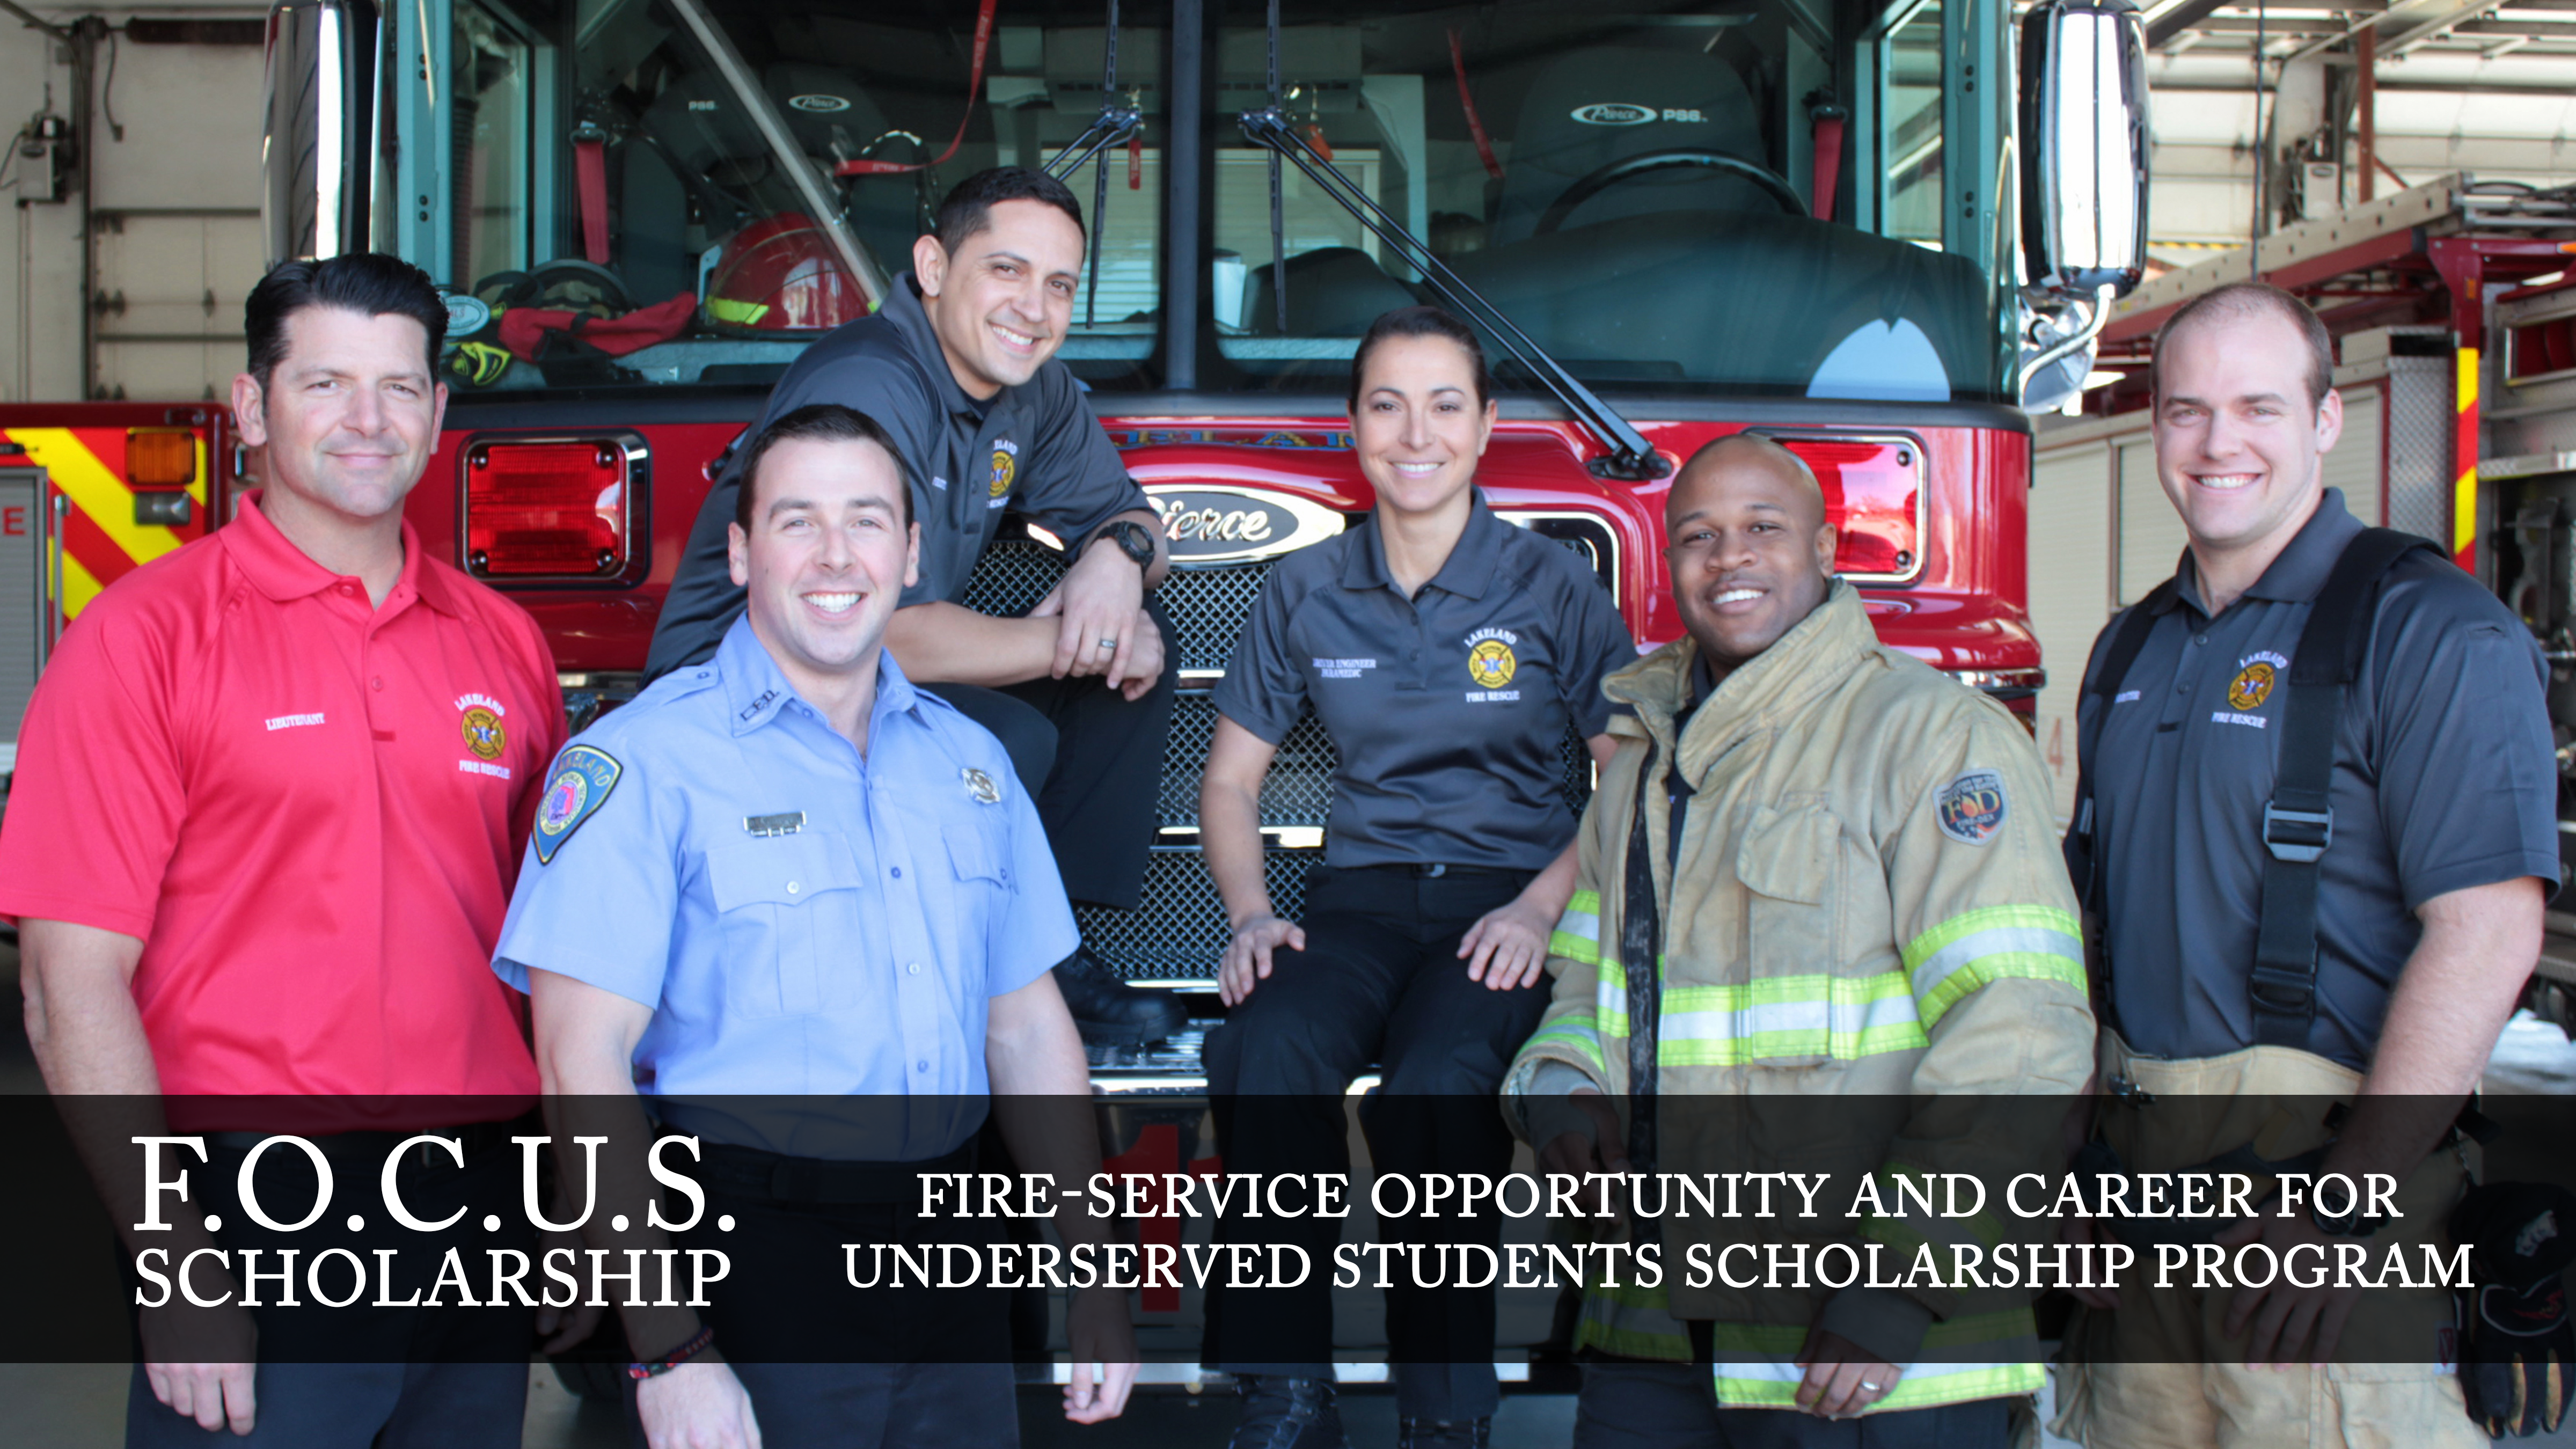 Image of diverse firefighters promoting scholarship program